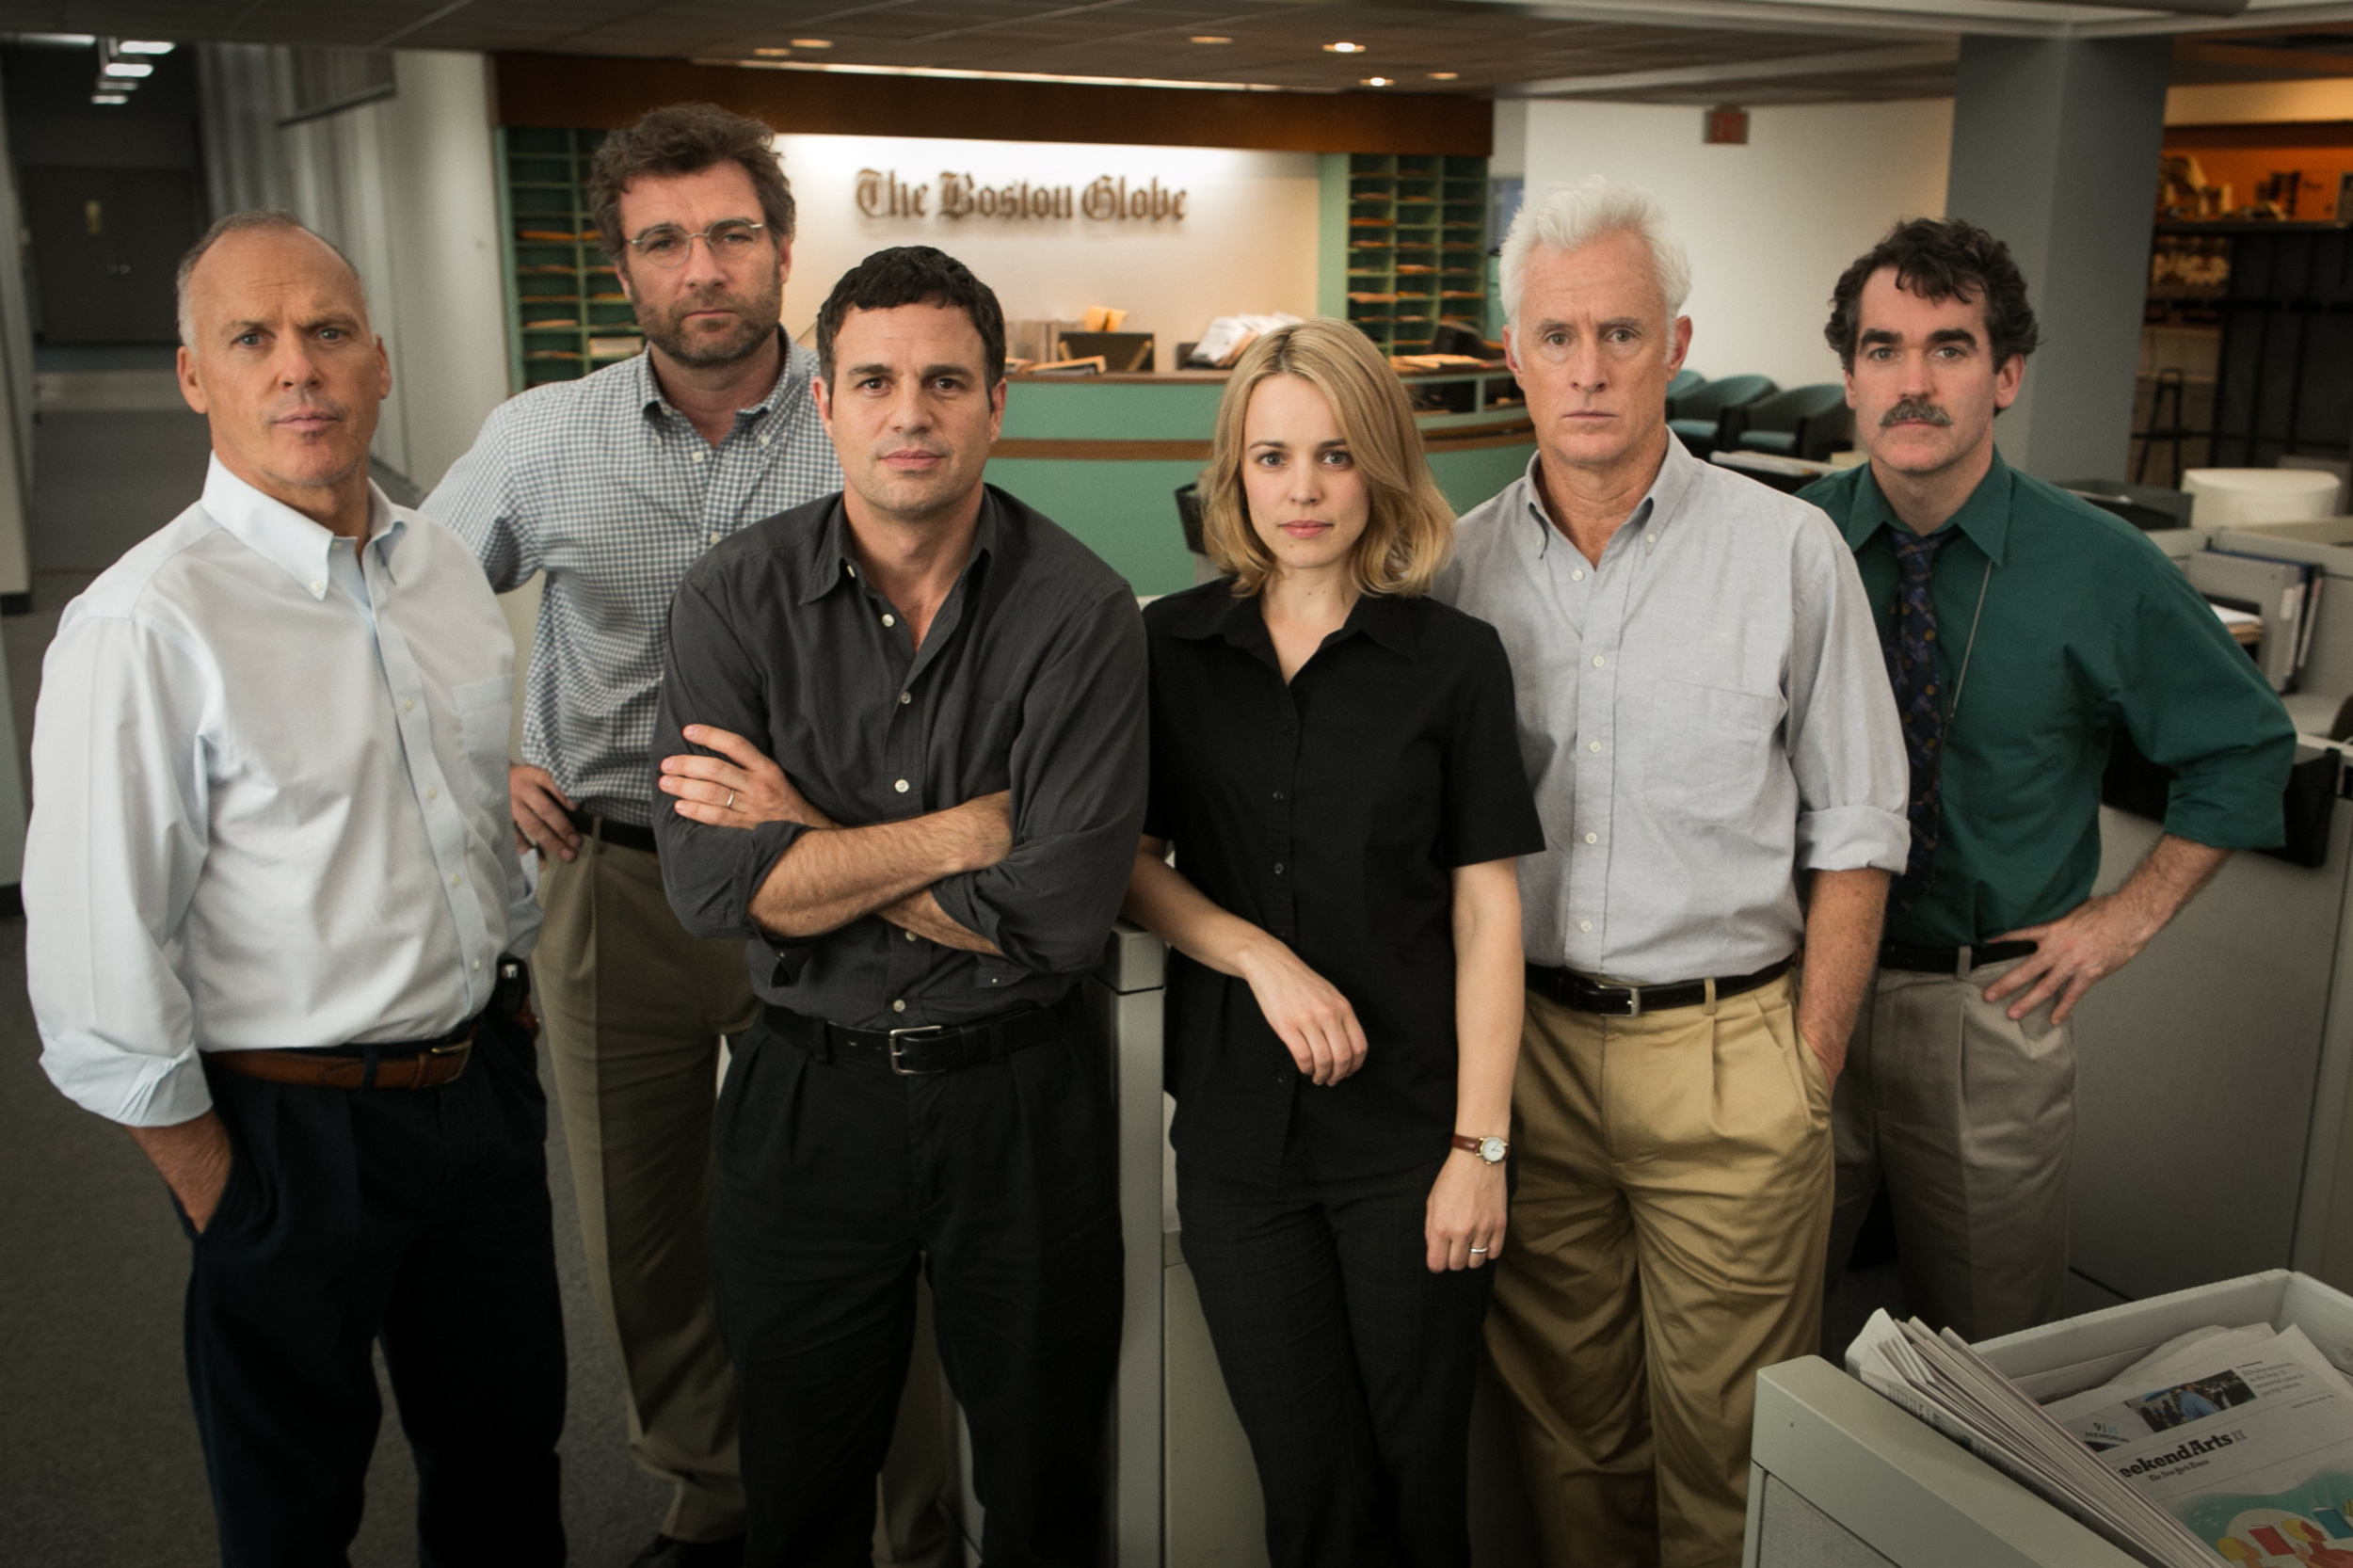 <p>Named after the "spotlight" team at the Boston Globe, this film depicts a group of journalists as they seek to unravel a child sex abuse scandal within the Catholic church, which later earned the organization a Pulitzer Prize. The film, starring Stanley Tucci, Mark Ruffalo, and Rachel McAdams, was equally lauded, and took home the Best Picture award at the Academy Awards. </p><p>You may also like: <a href='https://www.yardbarker.com/entertainment/articles/the_craziest_things_musicians_have_done_on_stage_040424/s1__38527145'>The craziest things musicians have done on stage</a></p>